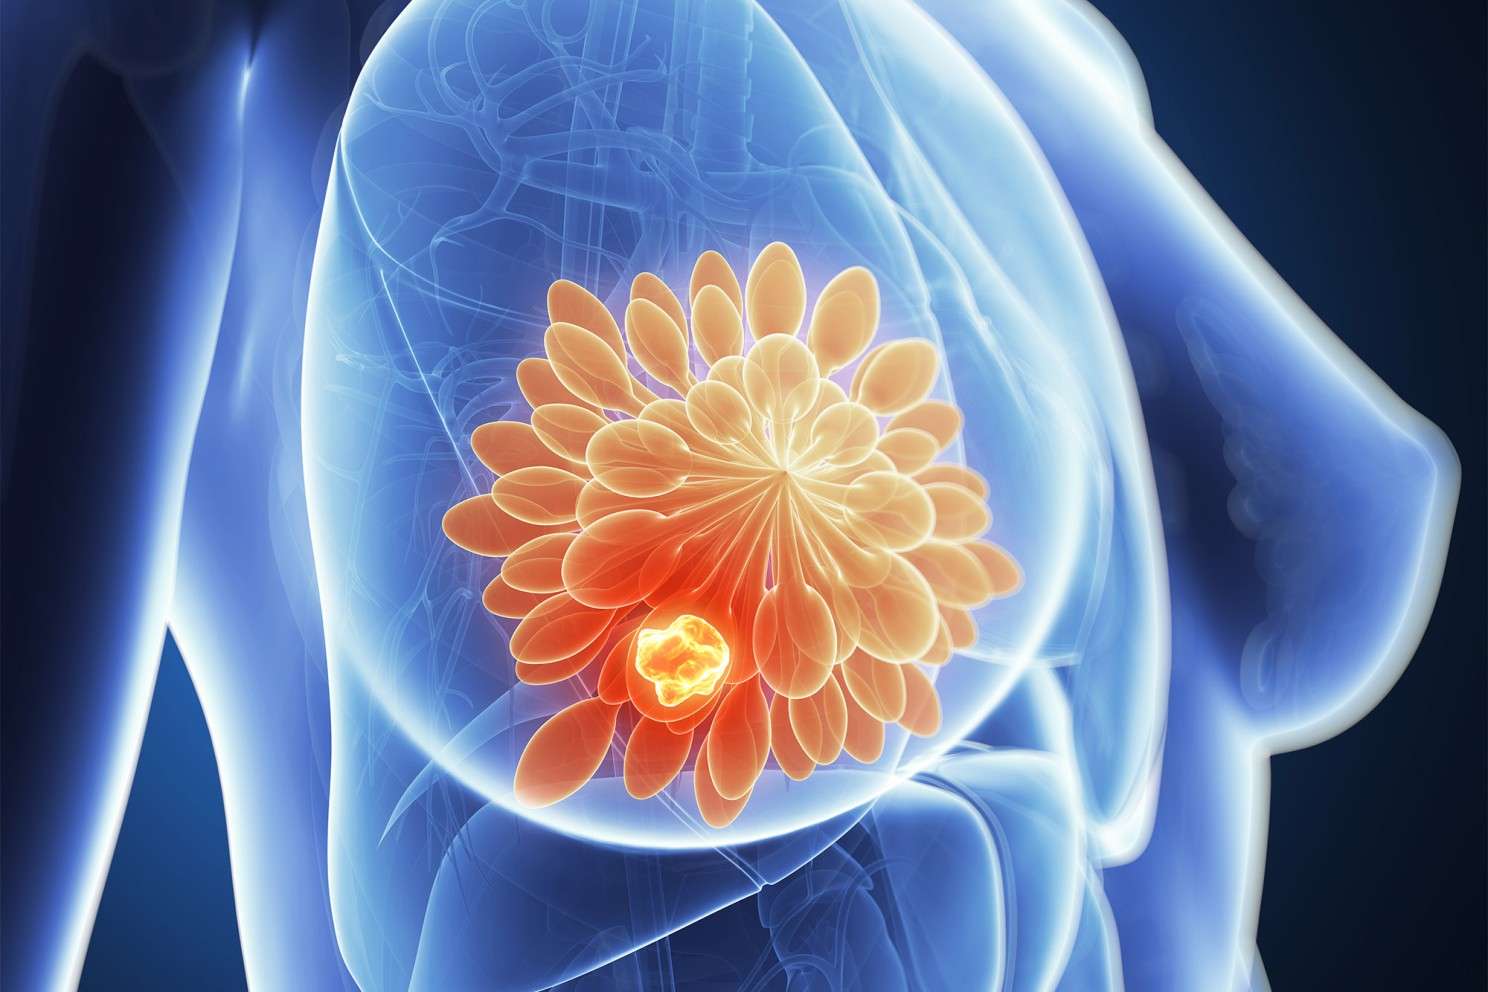 Breast cancer treatment could lead to incurable tumors years later